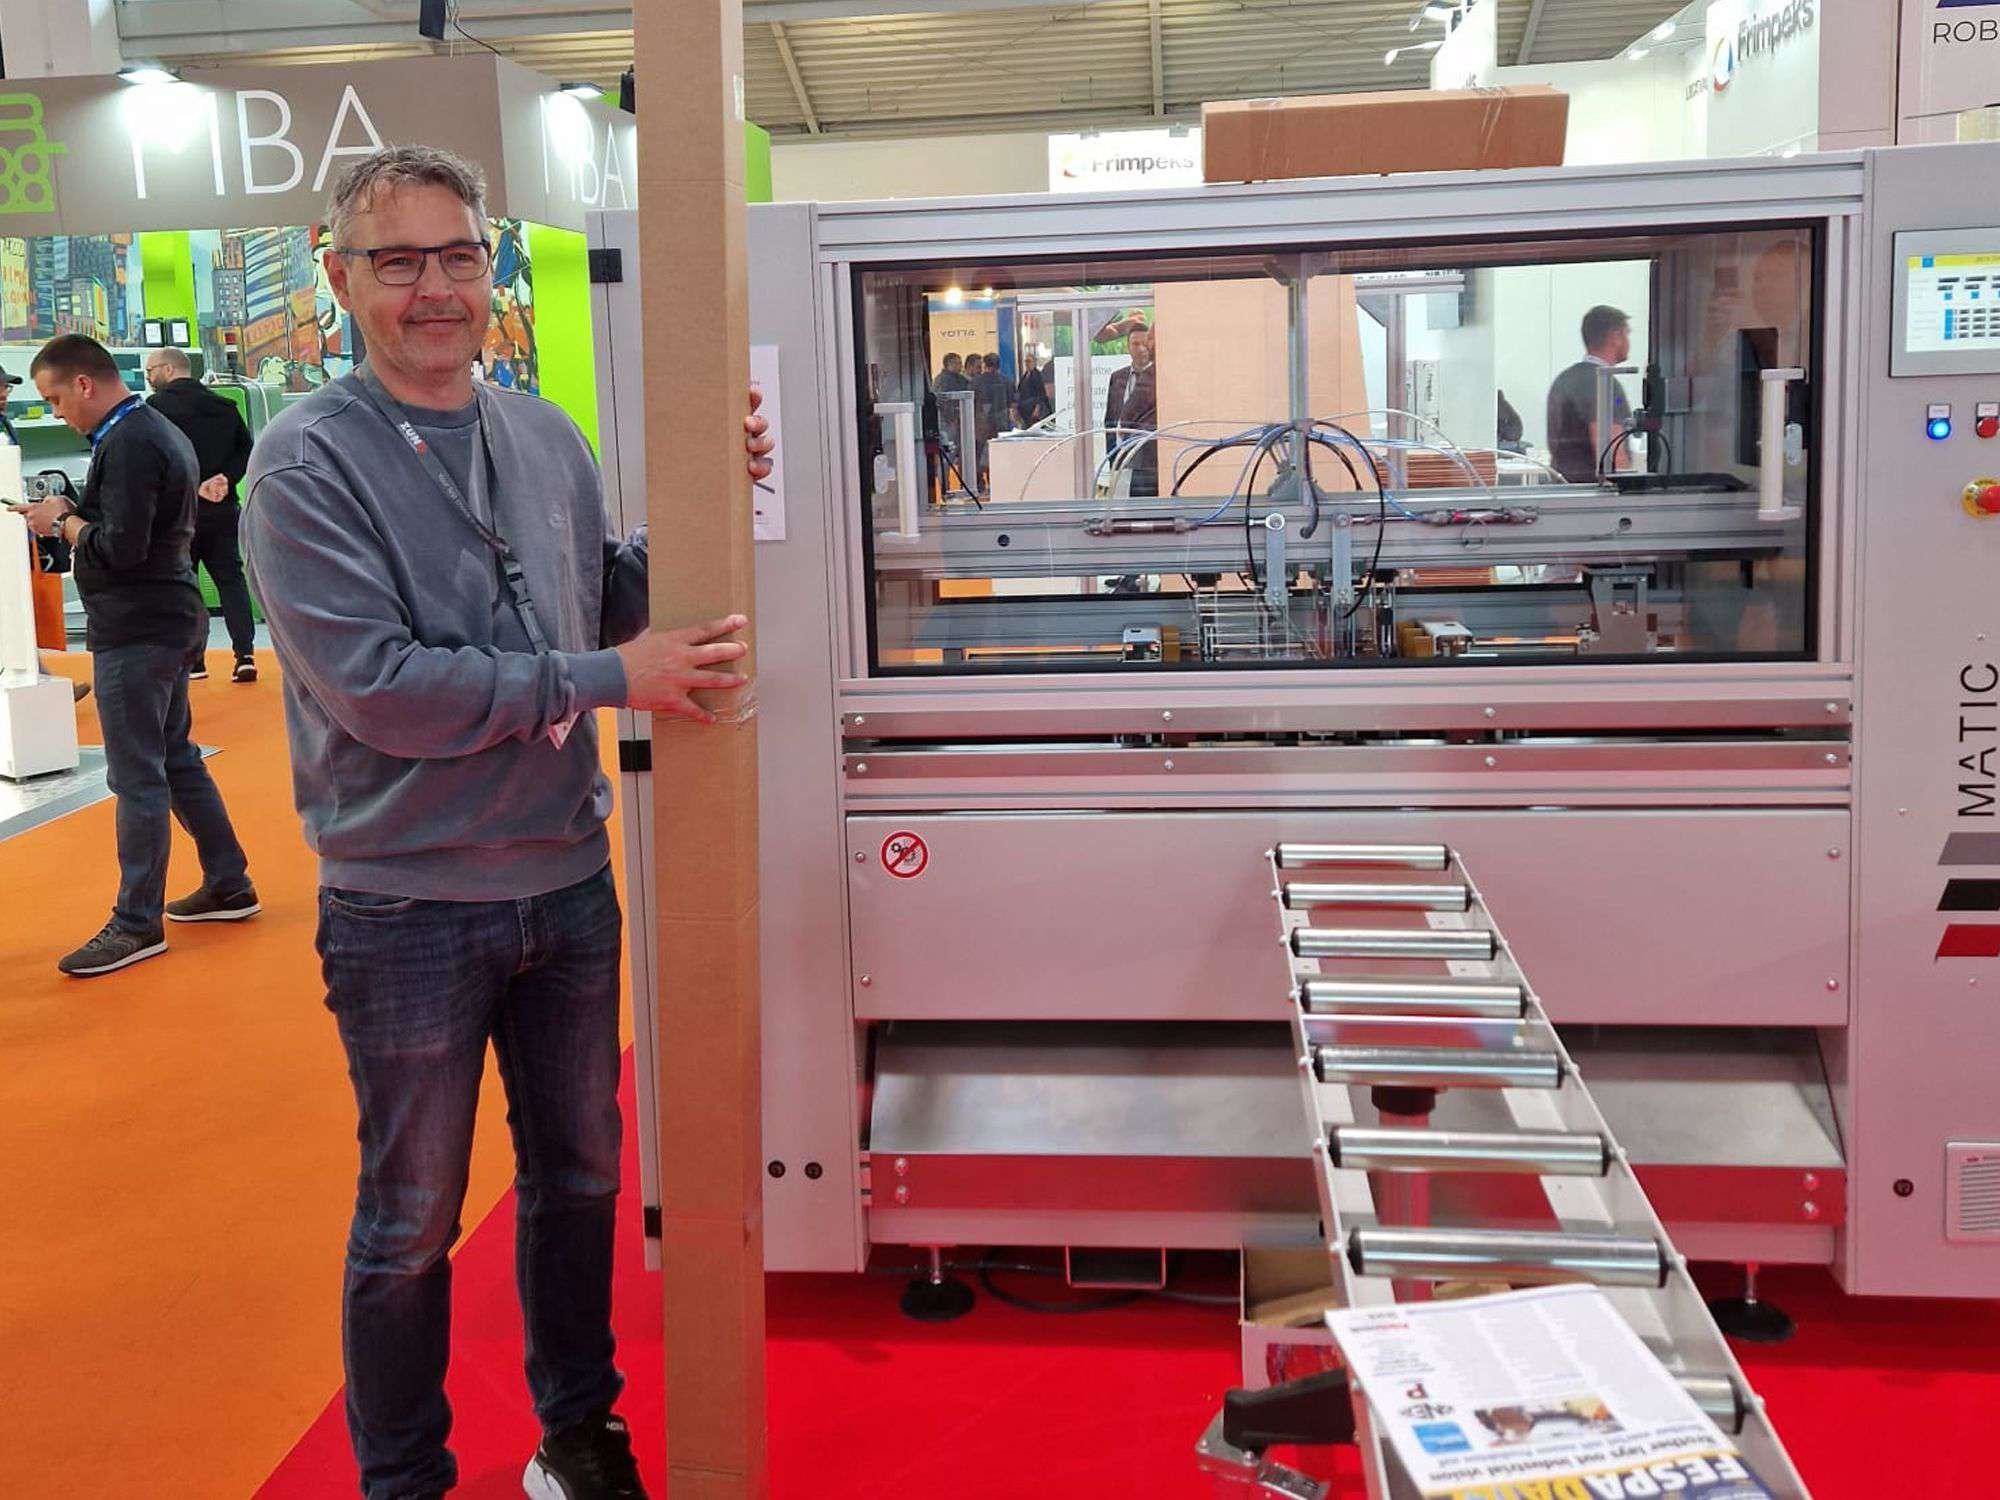 Thank you for visiting MATIC at FESPA 23!